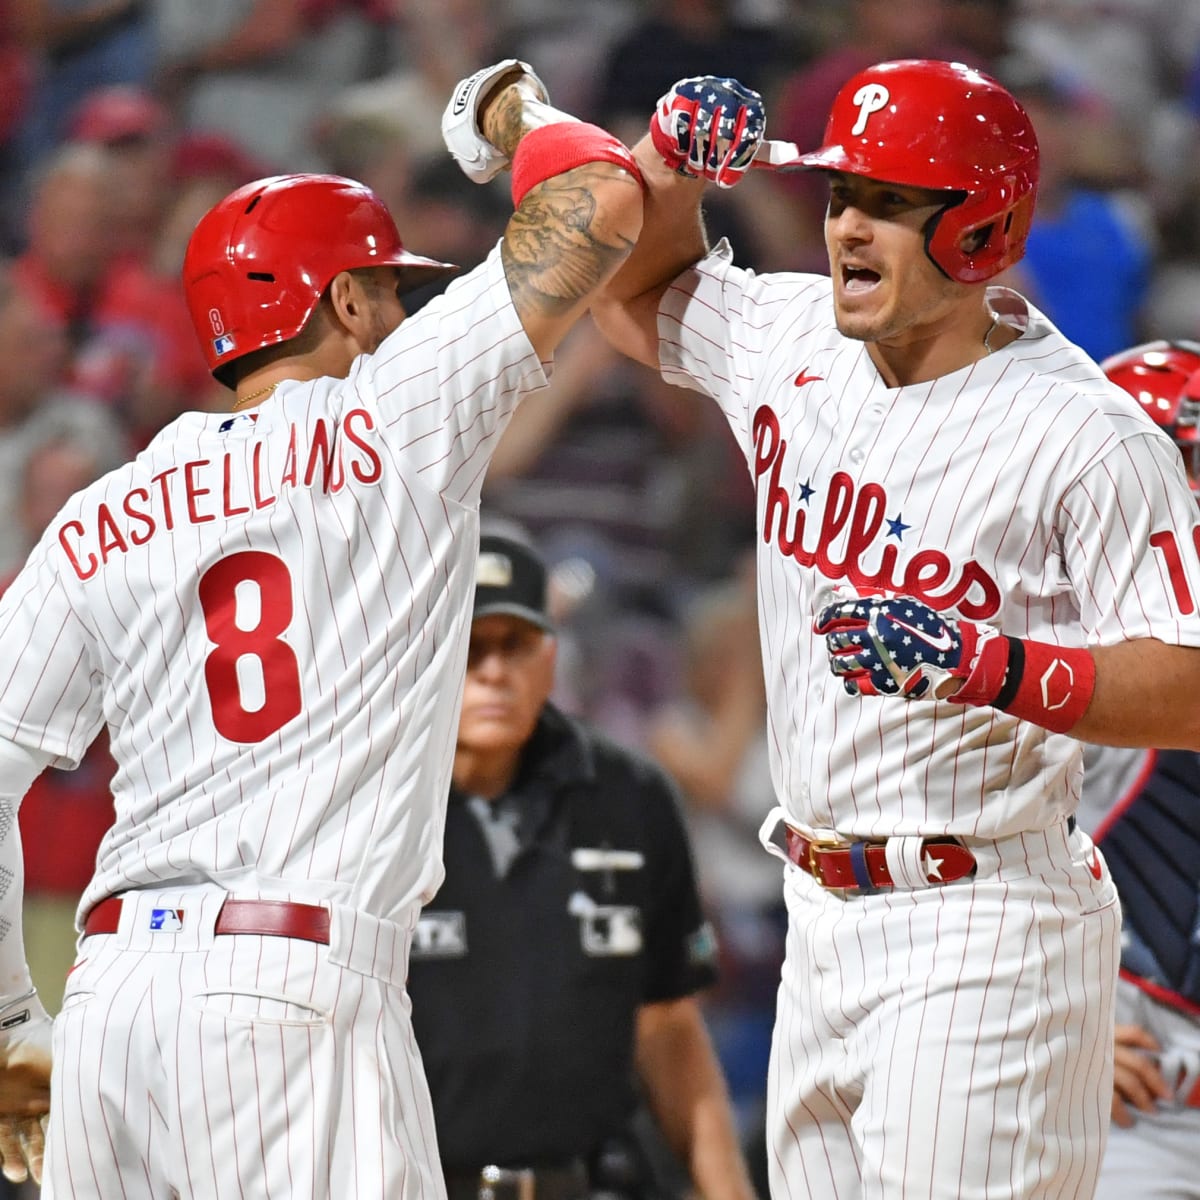 Phillies to face Cardinals in St. Louis in Wild Card Series starting Friday